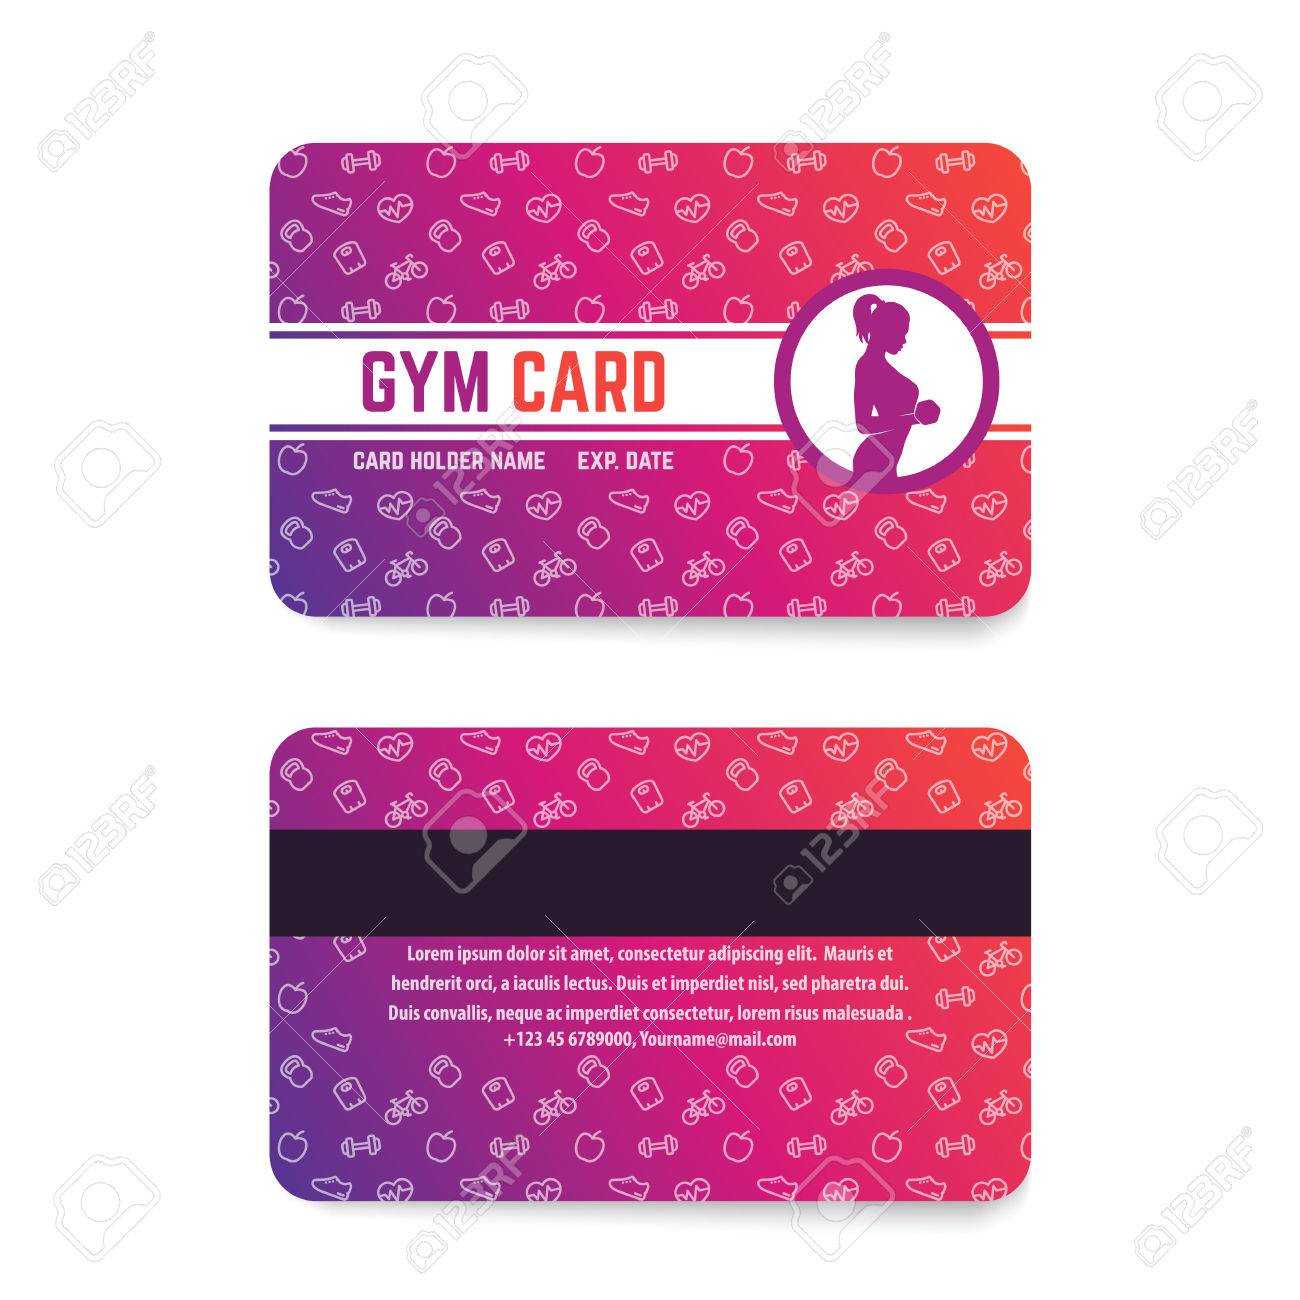 A Fitness Club Or Gym Card Template. In Gym Membership Card Template